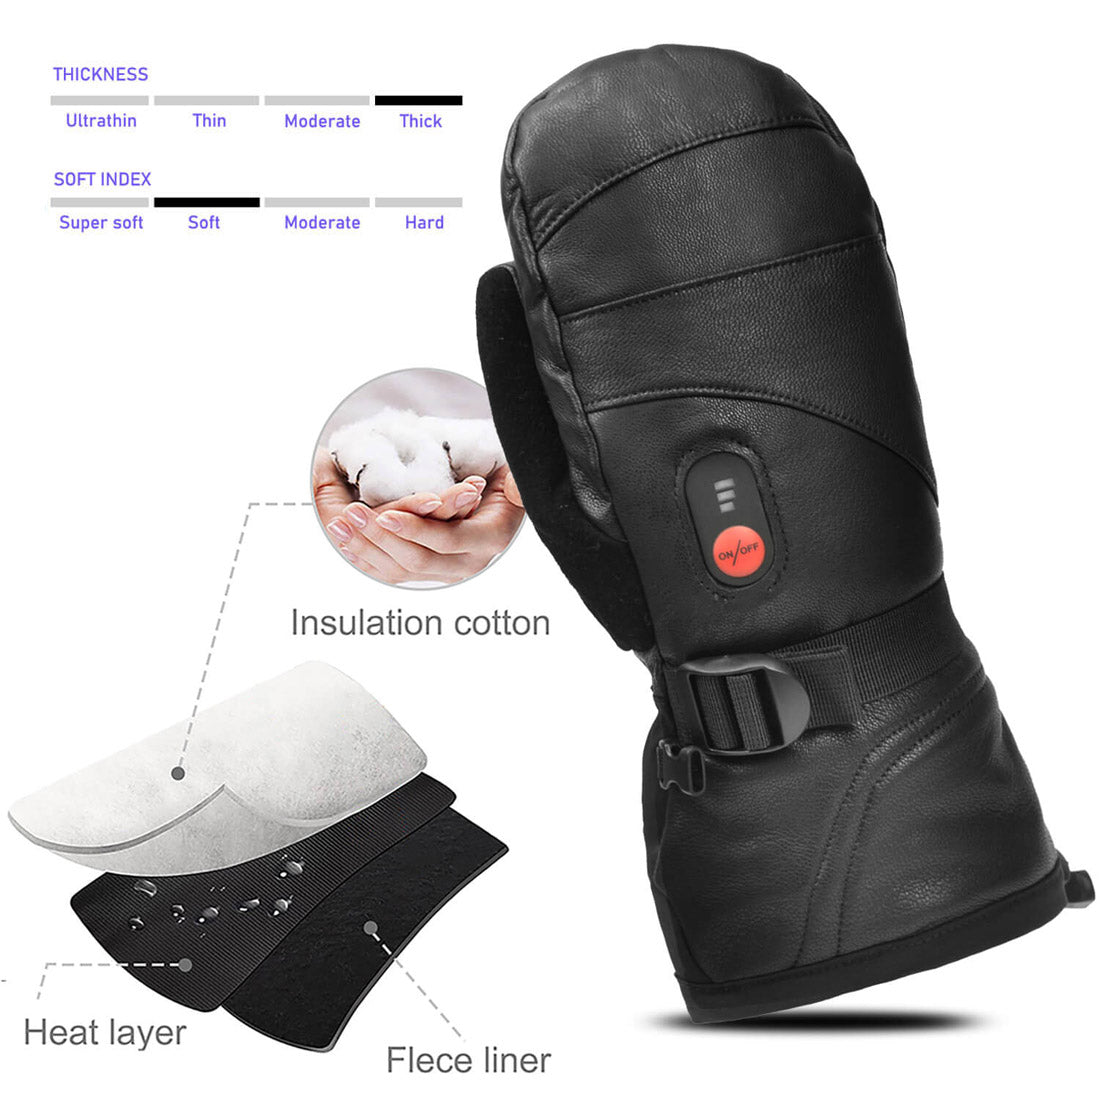 Savior Leather Heated Mittens  Battery Operated Leather Warming Mitte -  Keepwarming